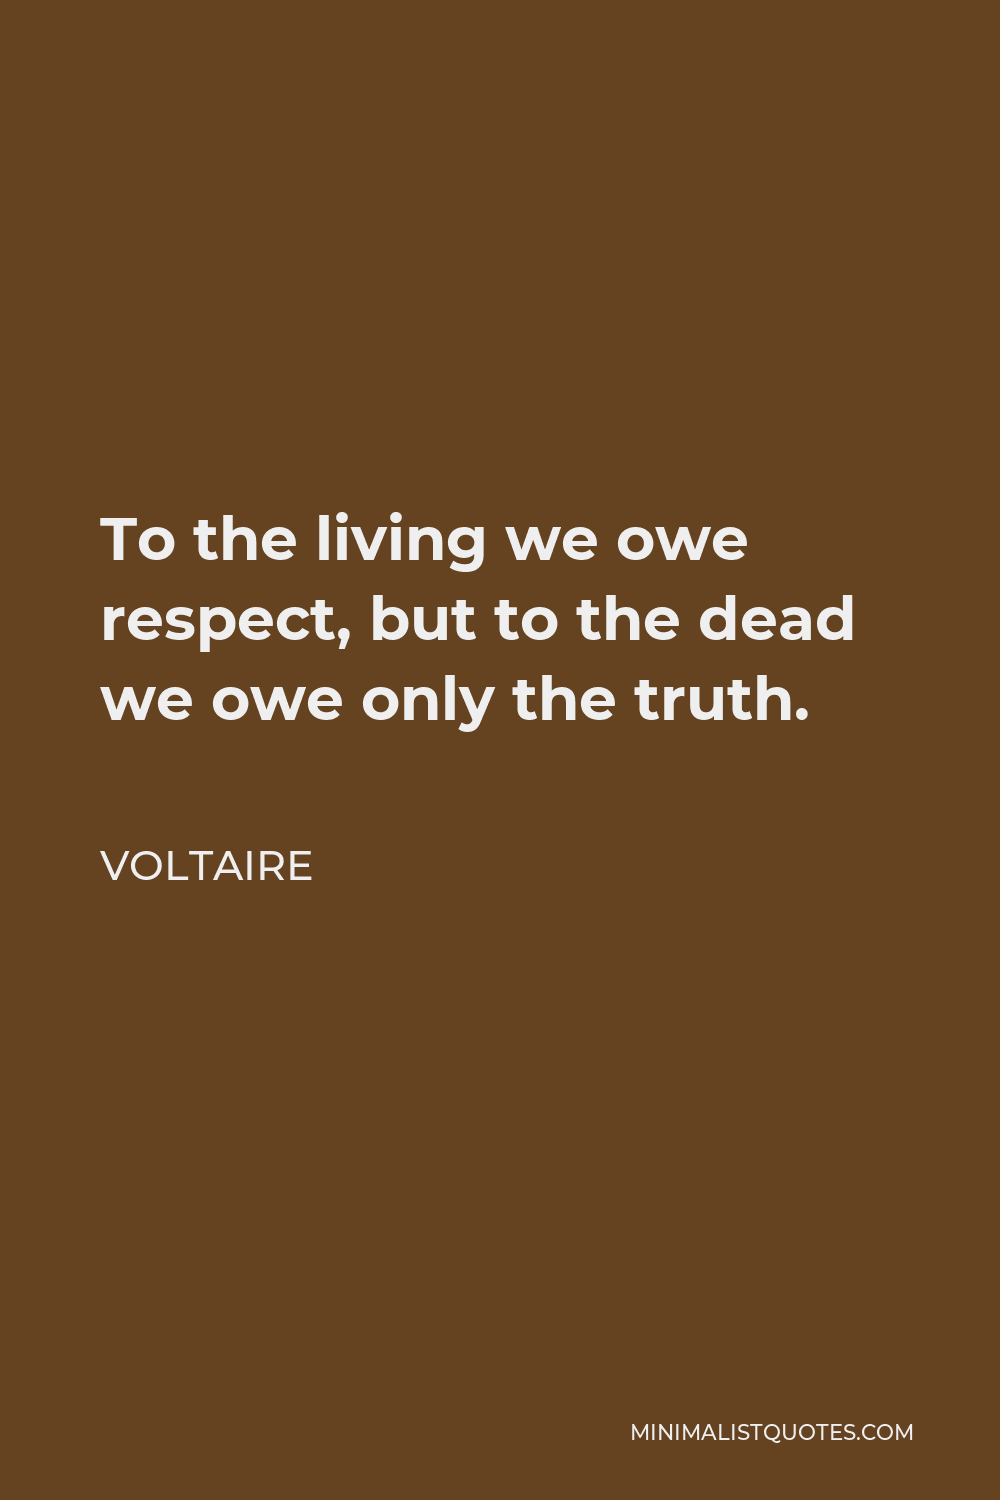 Voltaire Quote - To the living we owe respect, but to the dead we owe only the truth.